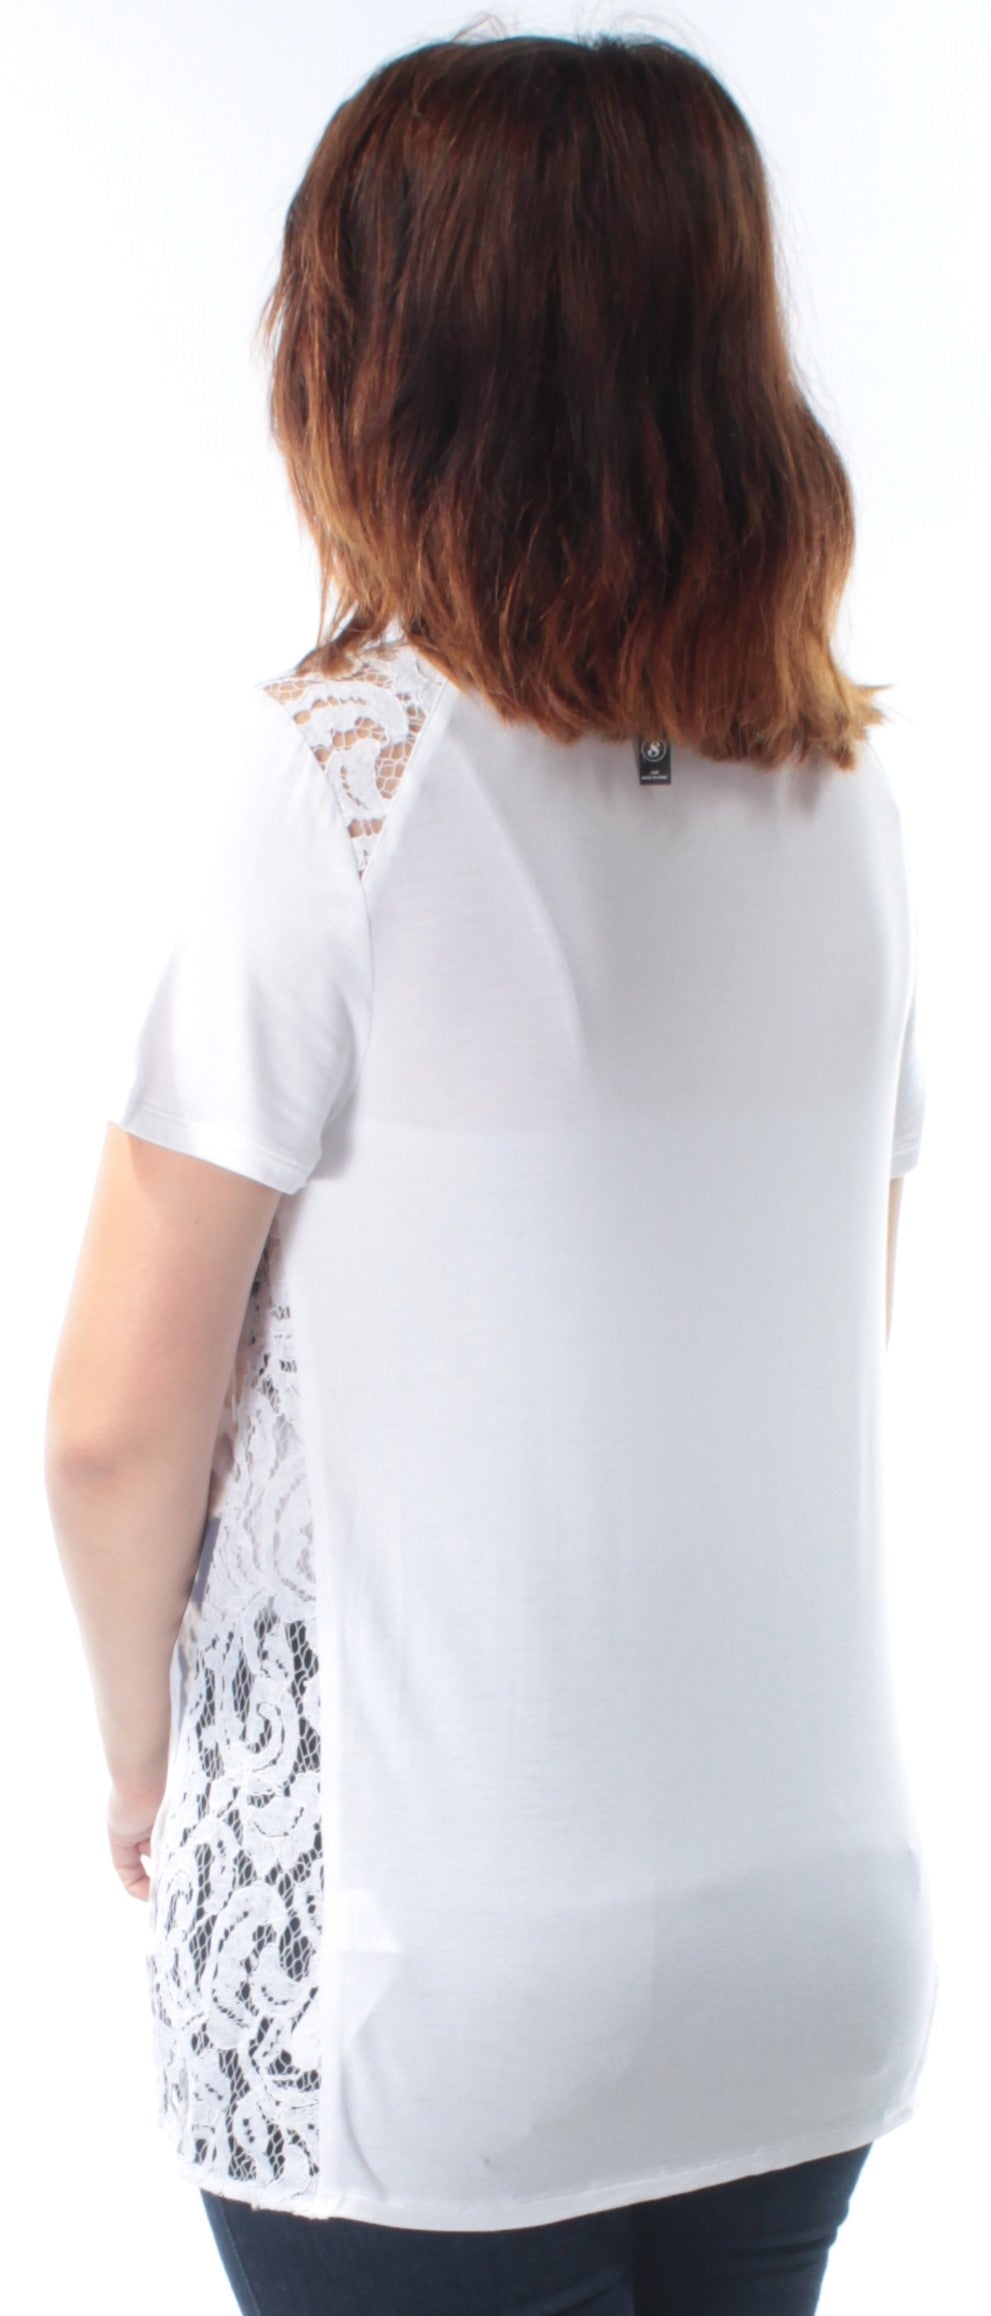 KENSIE Womens White Lace Details Printed Short Sleeve Jewel Neck T-Shirt